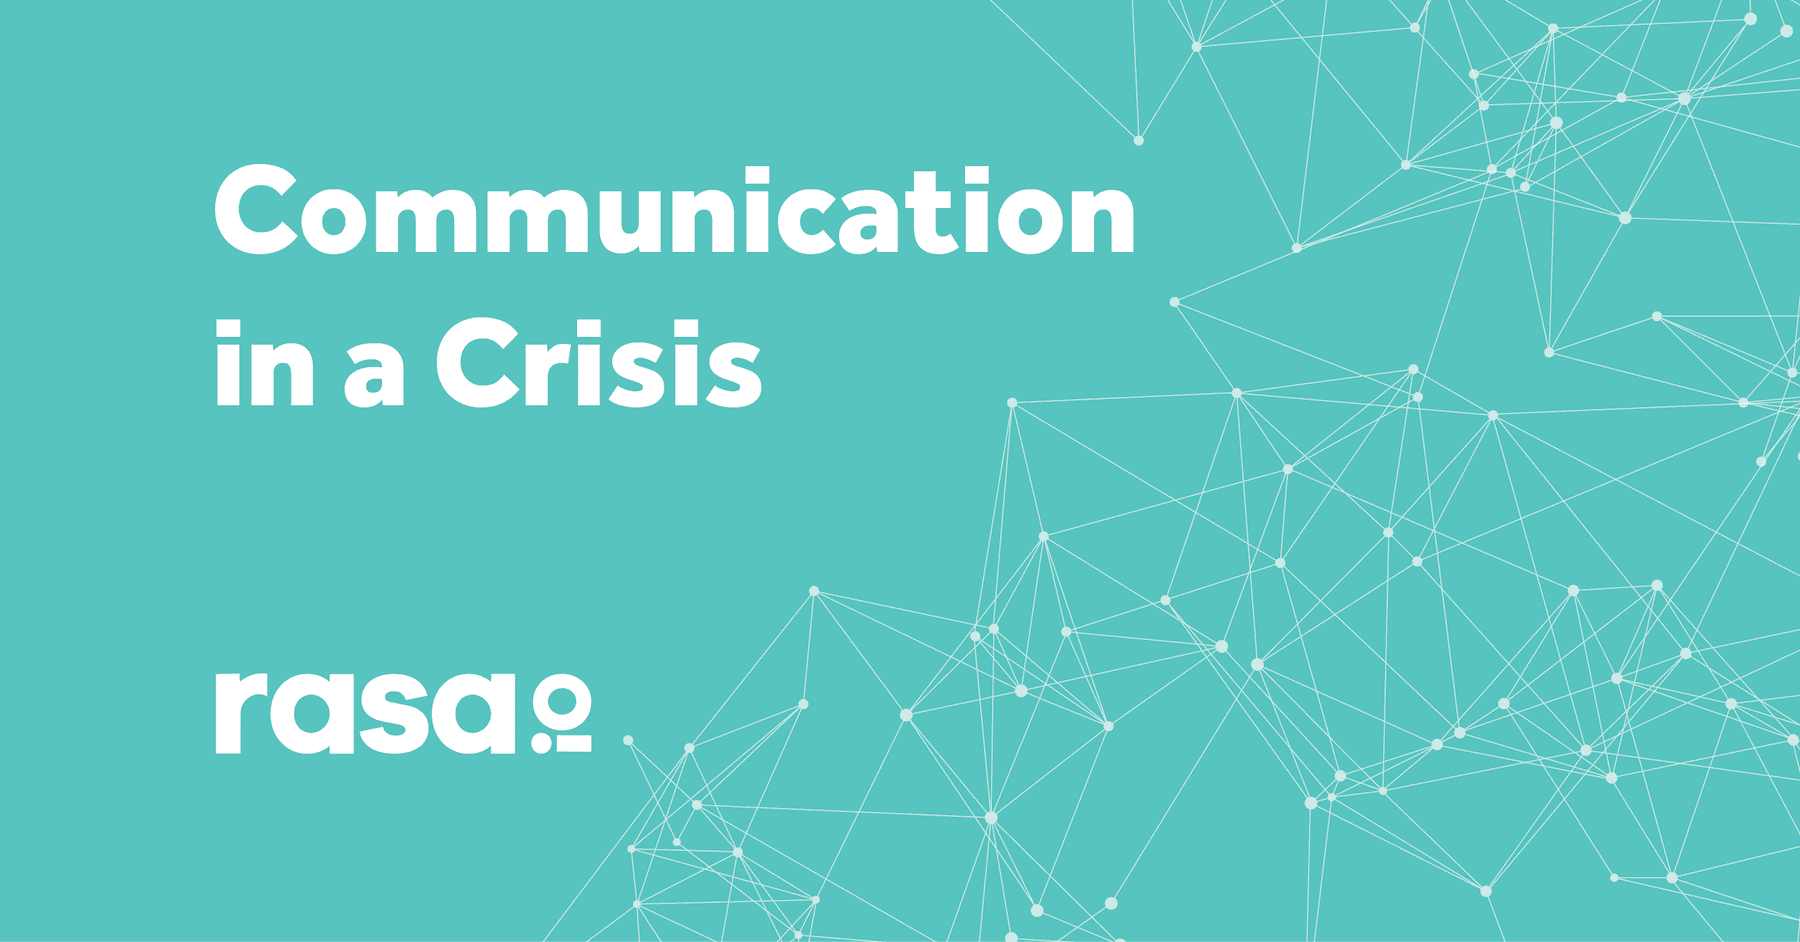 communication in a crisis with rasa.io